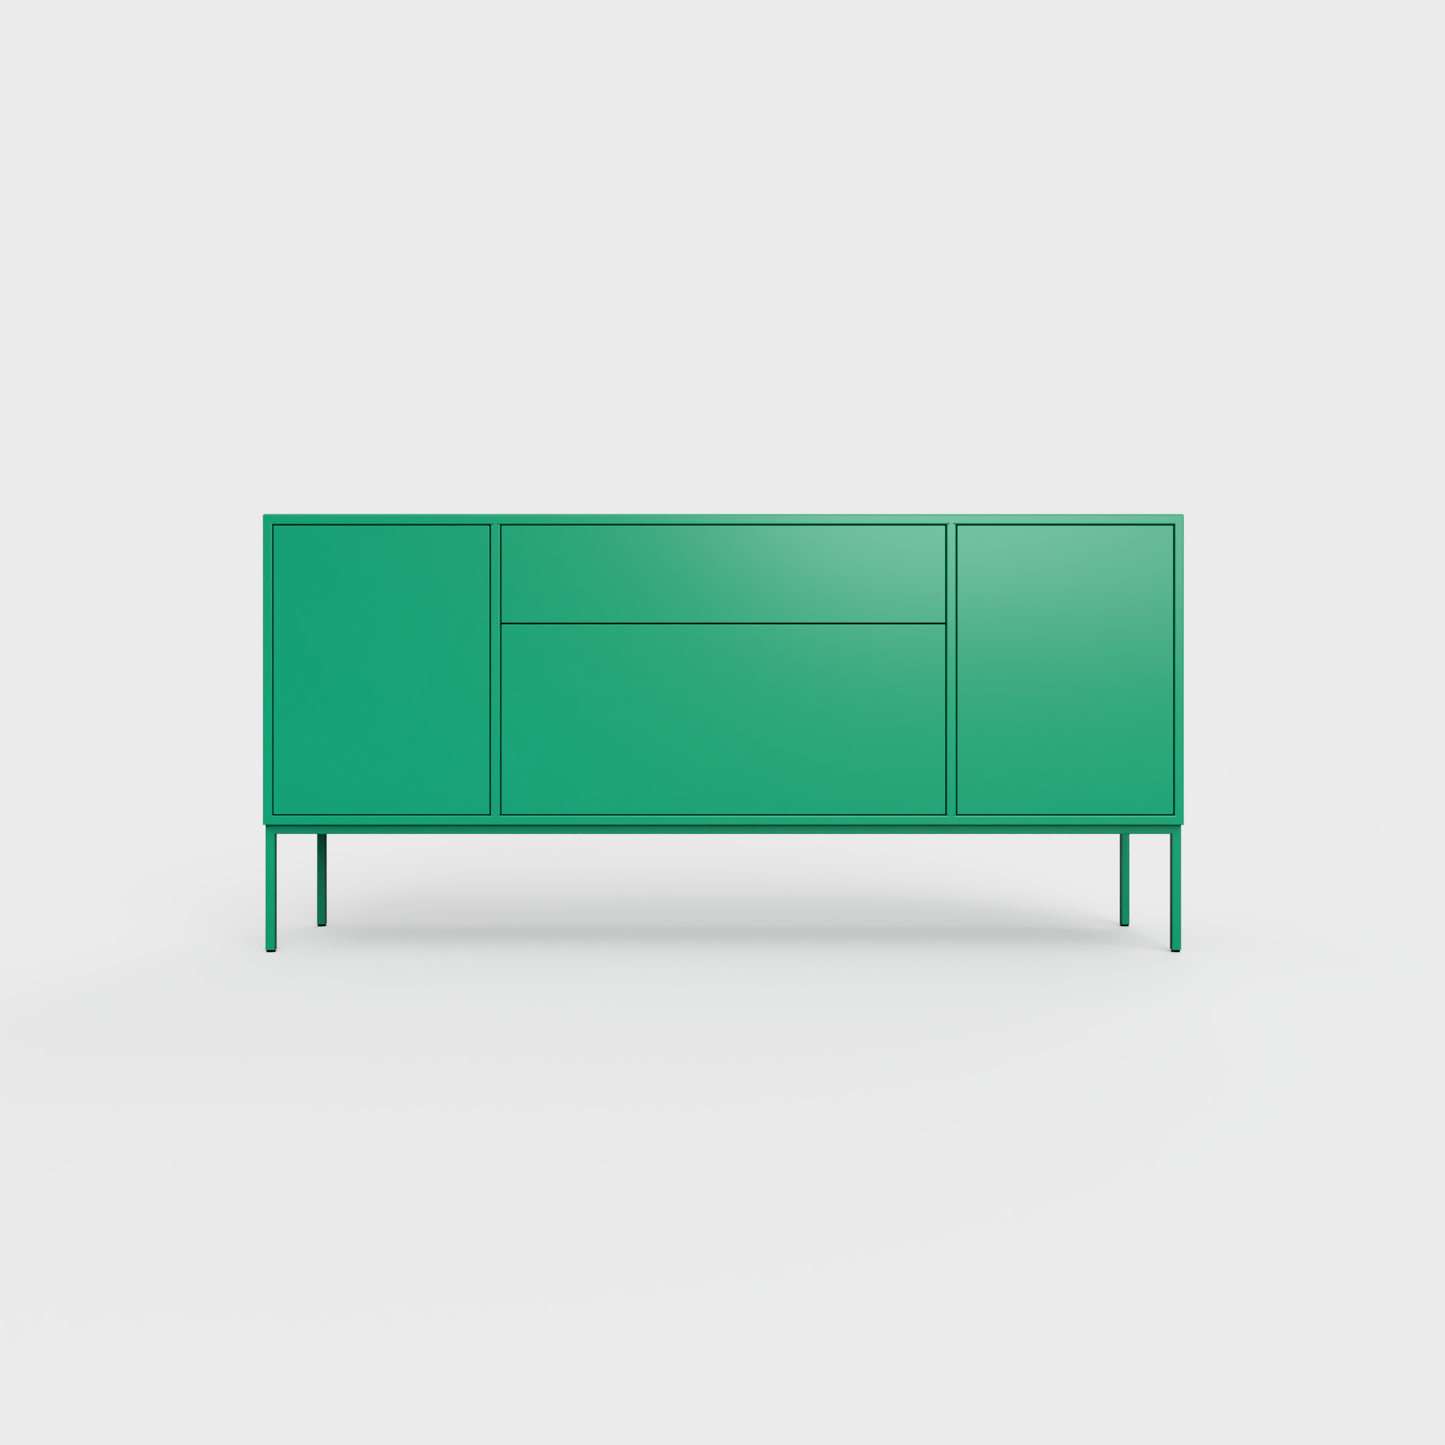 Arnika 02 Sideboard in Avocado color, powder-coated steel, elegant and modern piece of furniture for your living room